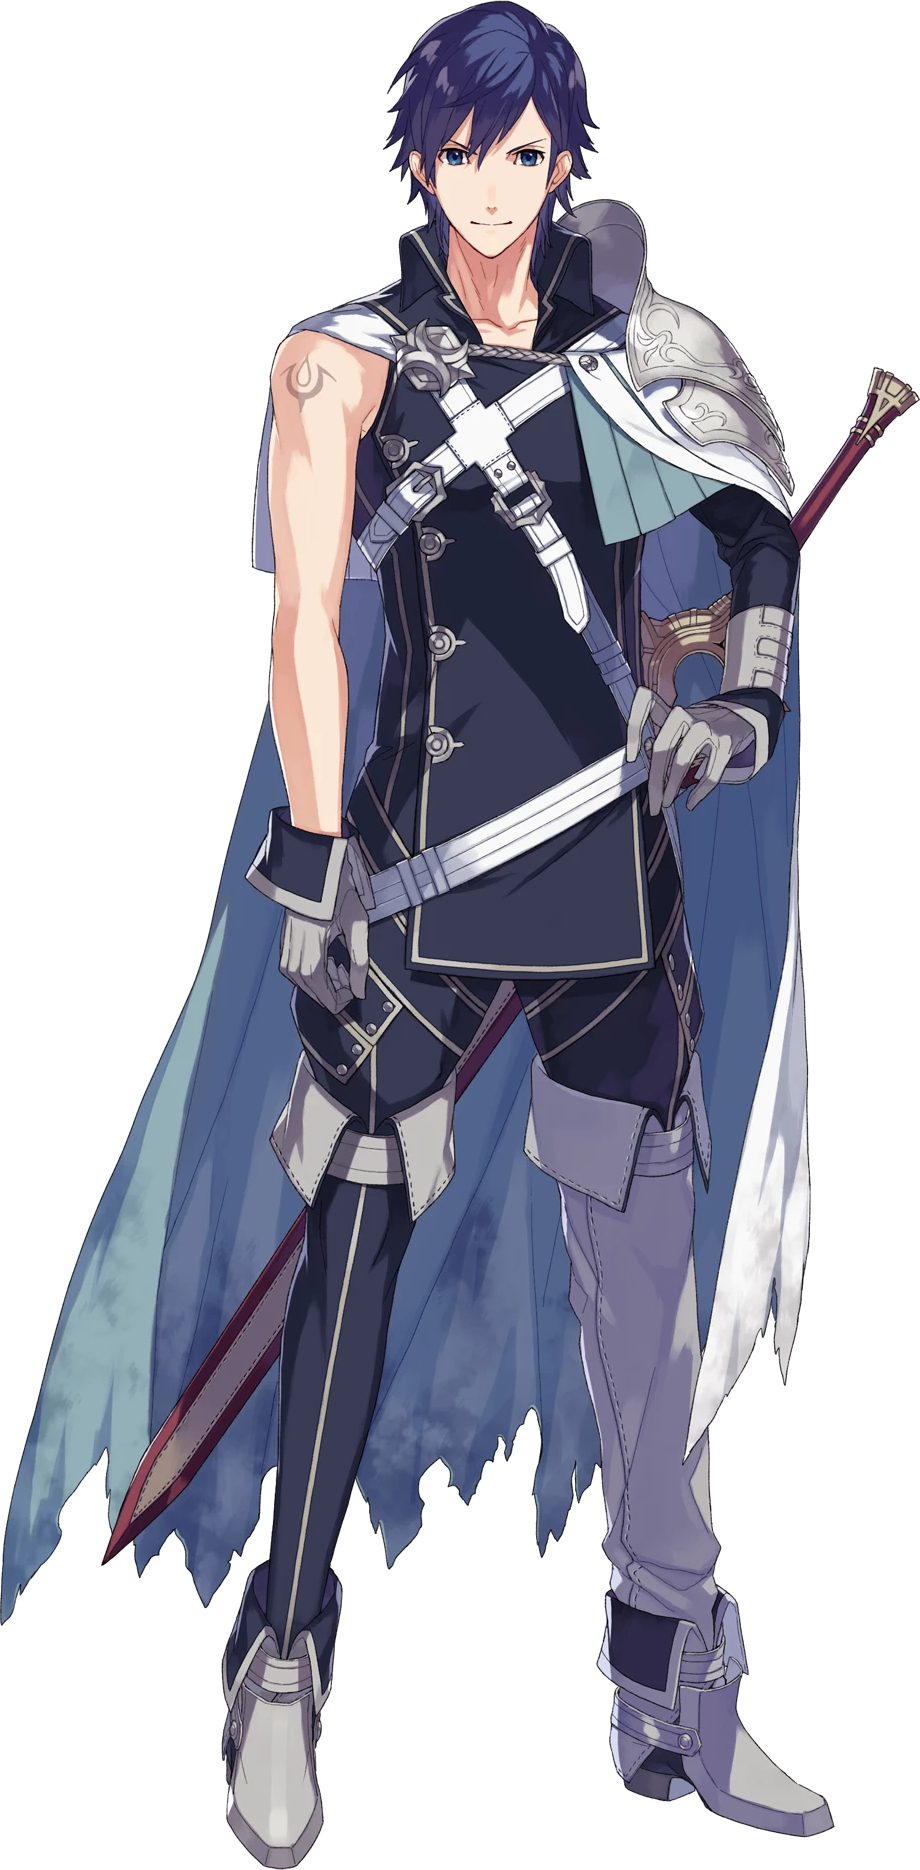 https://static.wikia.nocookie.net/smashbros/images/8/86/Art_Chrom_Heroes.png/revision/latest?cb=20201212215319&path-prefix=fr